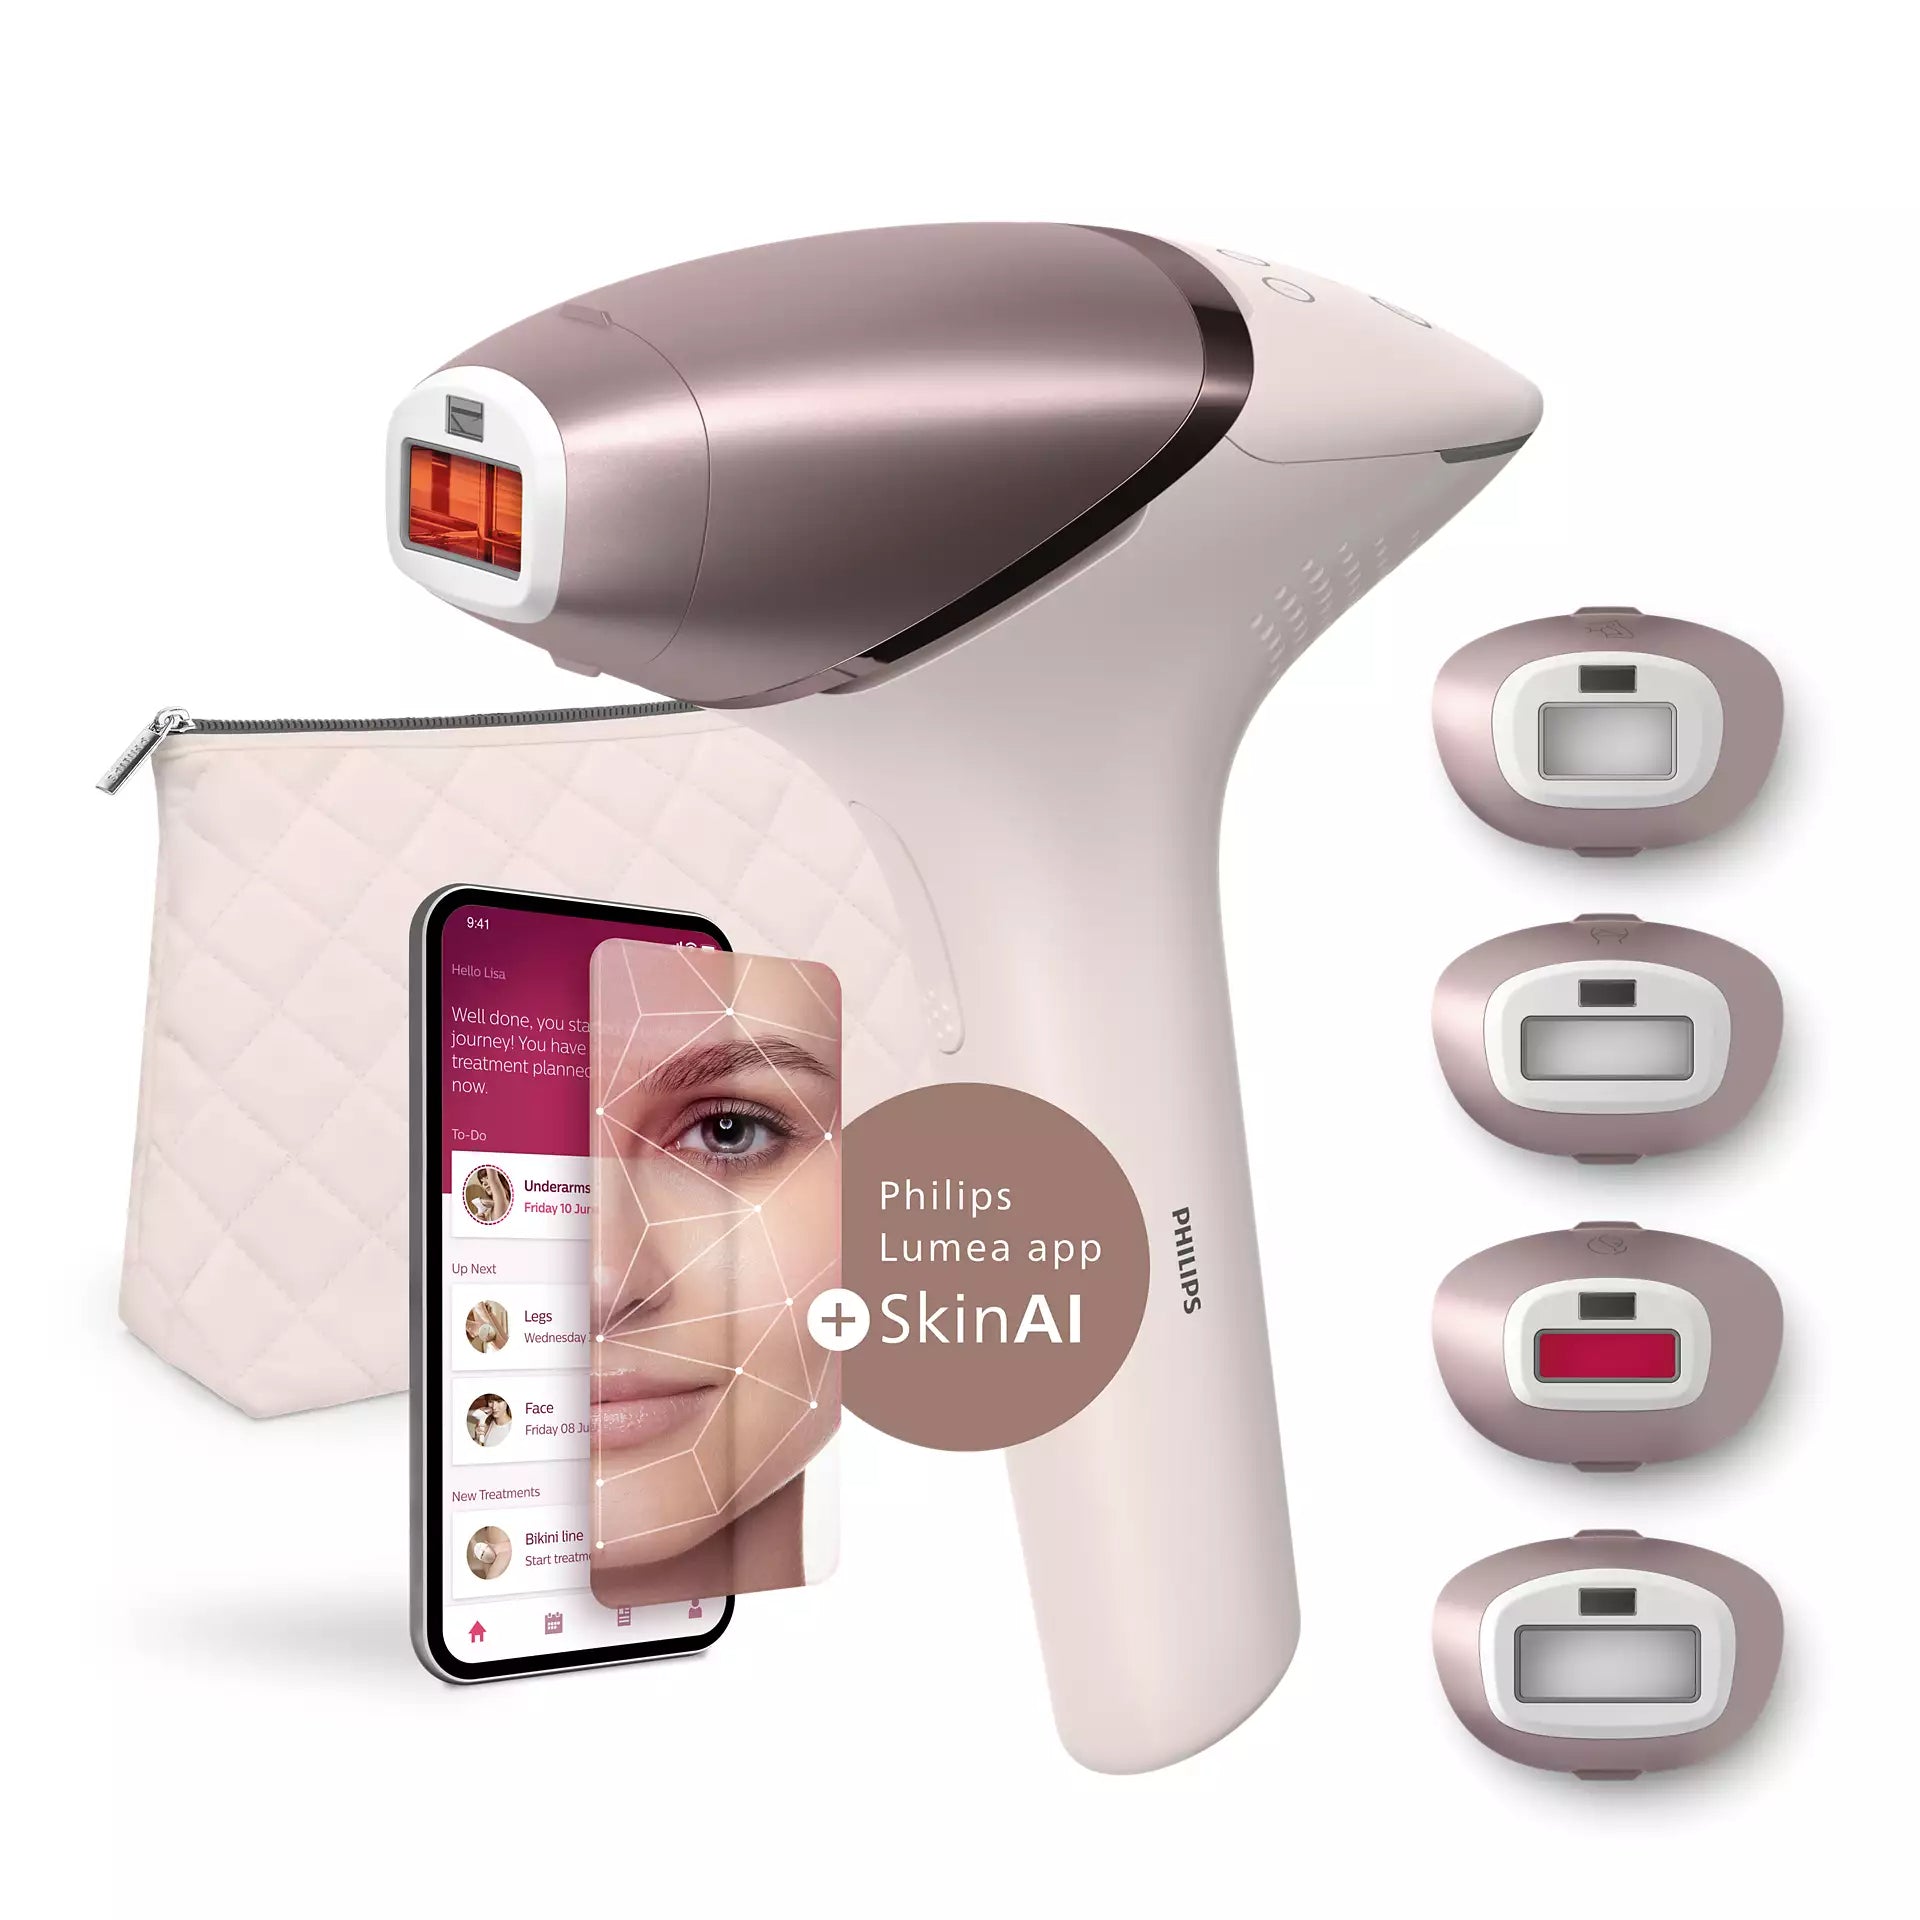 TRYING IPL HAIR REMOVAL AT HOME  NEW Philips Lumea Prestige IPL Review AD  